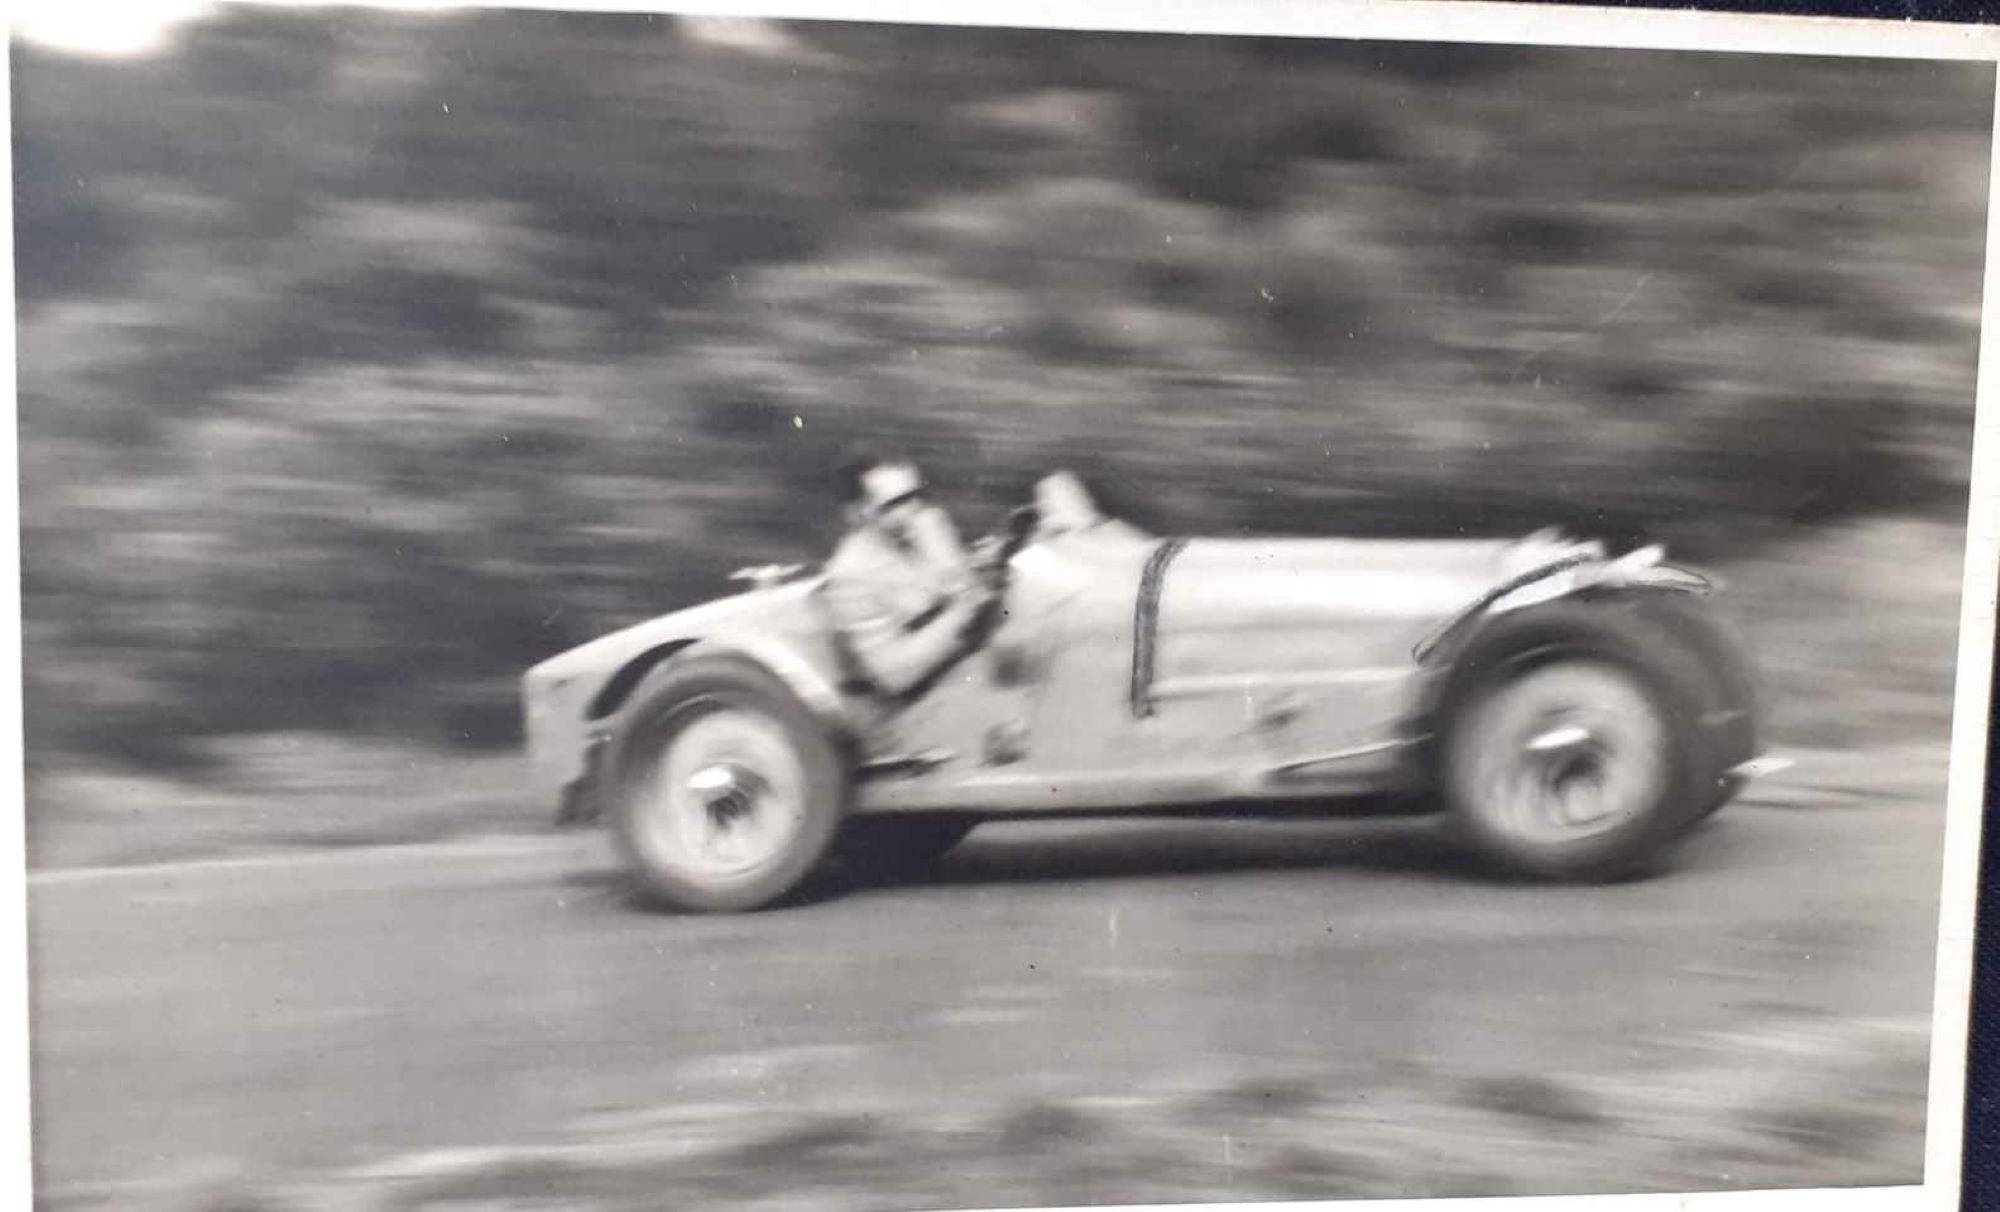 Name:  NSCC 1950 #0116 Bugatti T35 at speed - light colour 1950's - image Graeme Wells arch Anthony Wel.jpg
Views: 200
Size:  158.1 KB